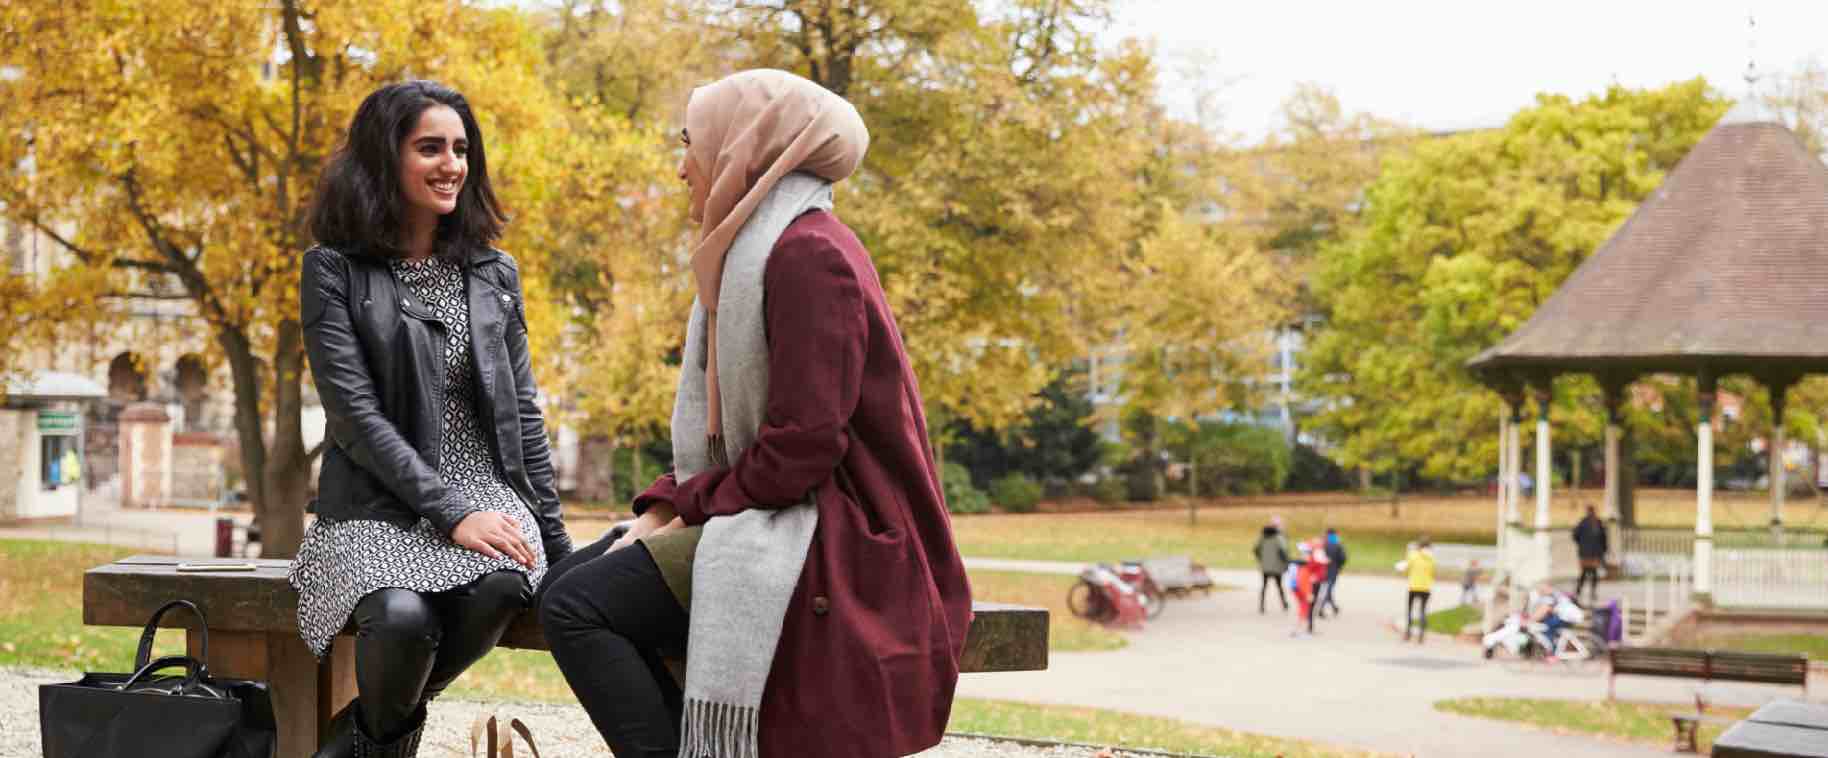 Two young women talking together on a bench in an urban park